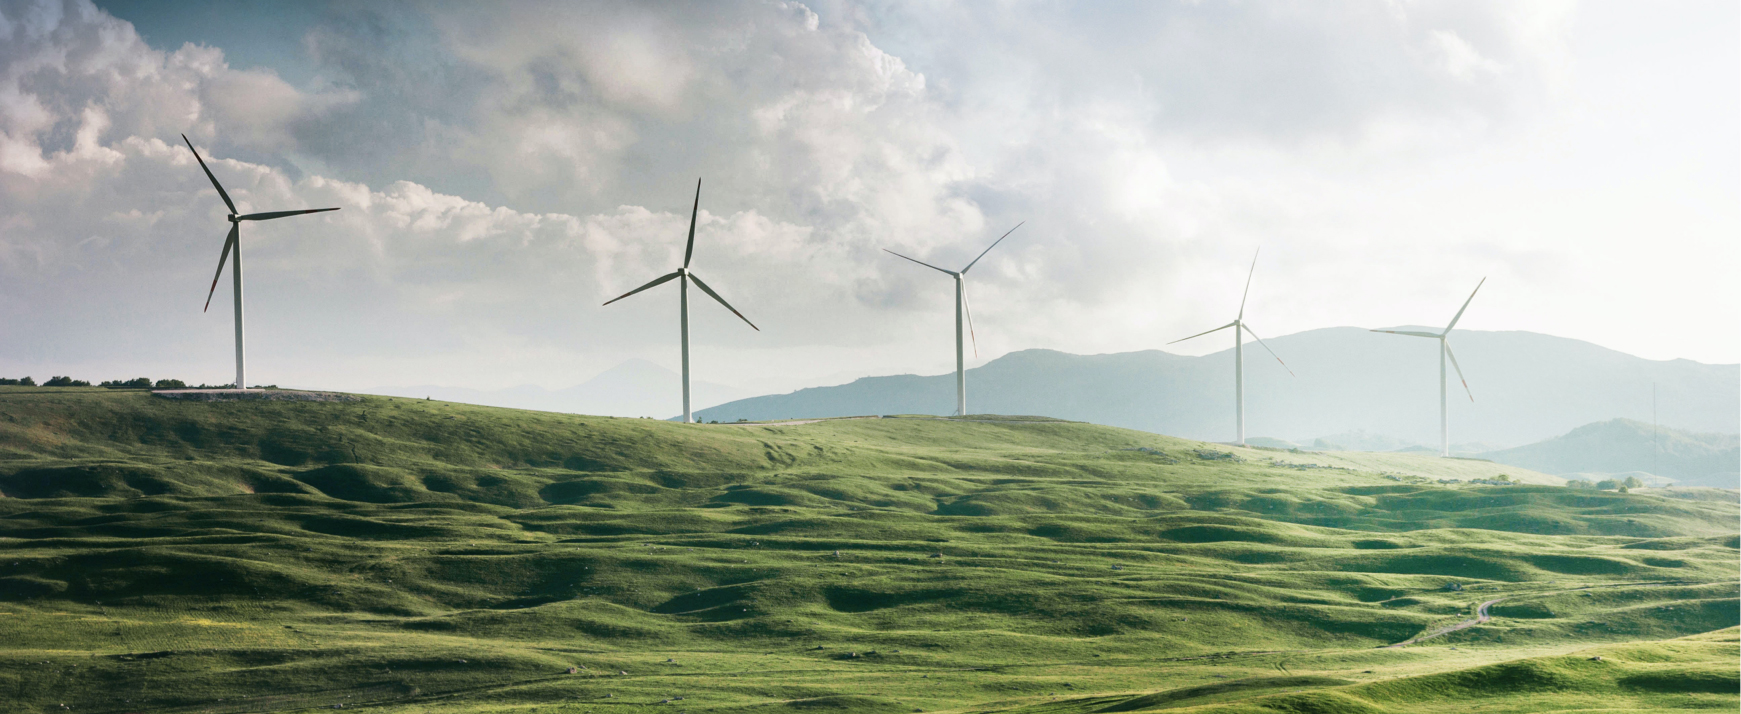 Image of turbines sitated on a green landscape